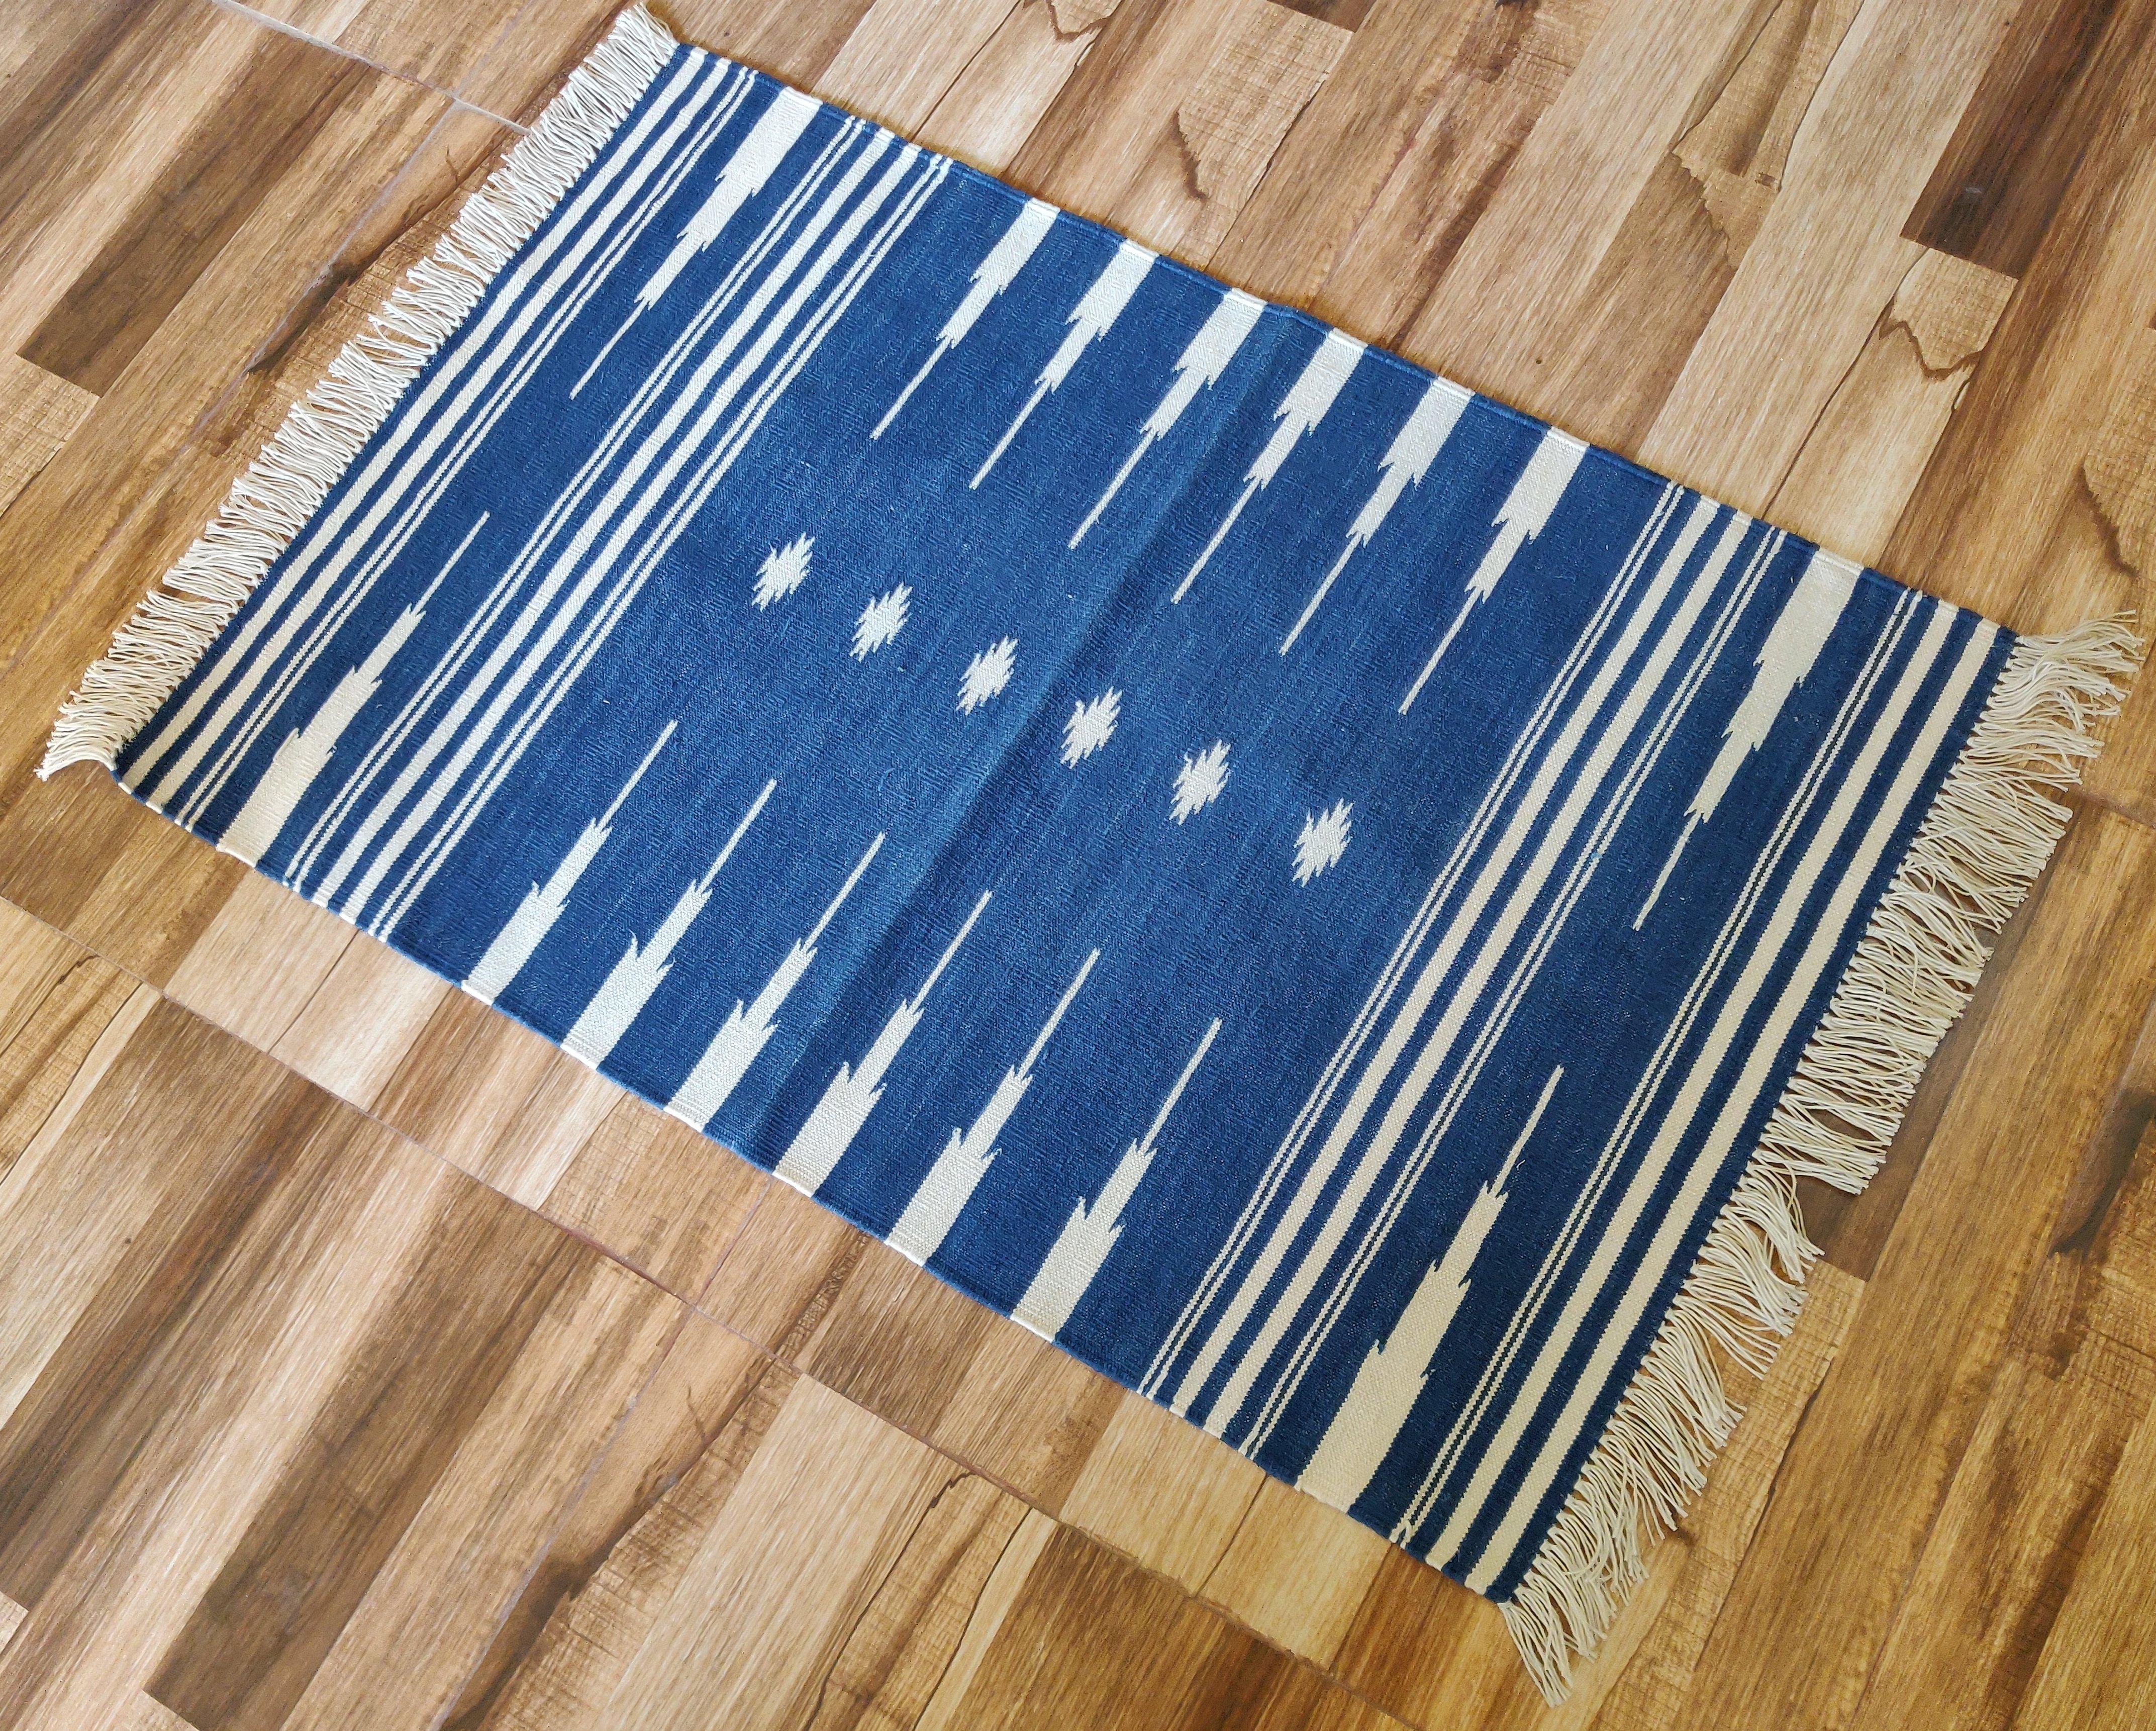 Cotton Vegetable Dyed  Blue And White Striped Indian Dhurrie Rug - 2'x3' (60x90cm) 

These special flat-weave dhurries are hand-woven with 15 ply 100% cotton yarn. Due to the special manufacturing techniques used to create our rugs, the size and